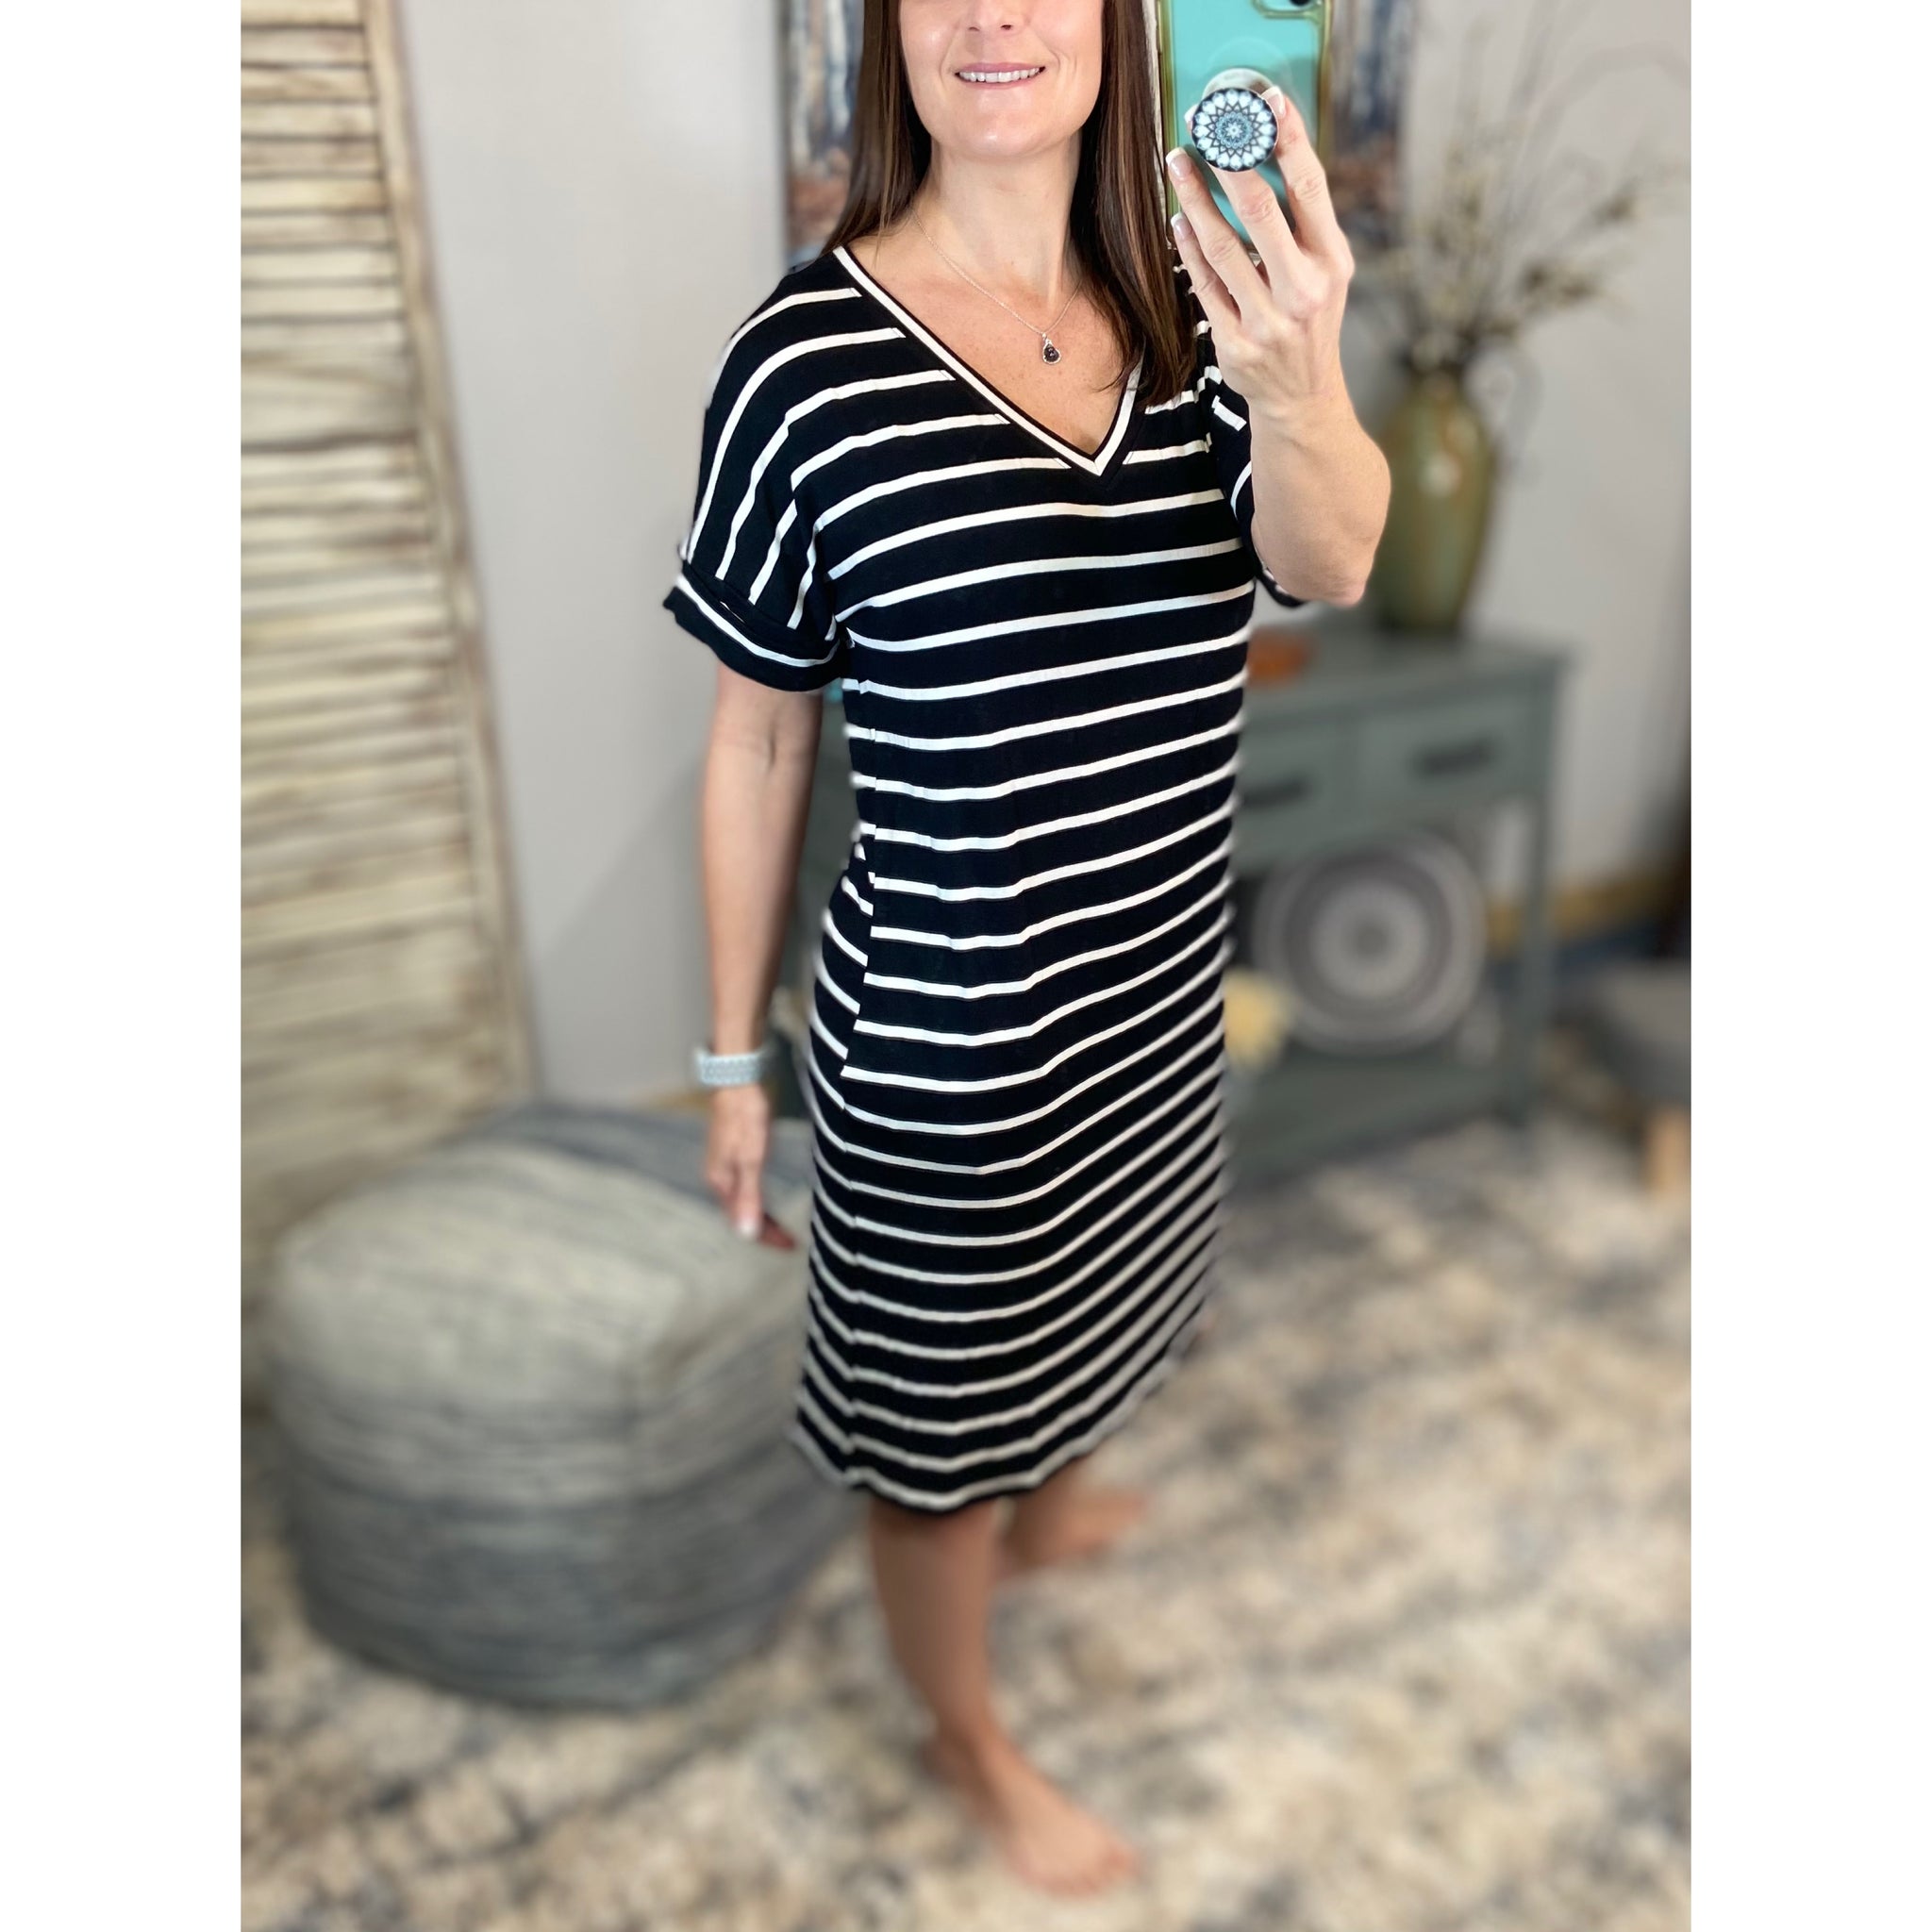 "Think Out The Box" Boxy V-Neck Striped Rolled Cuff Sleeve Pocket Summer Tee Shirt Dress Black S/M/L/XL